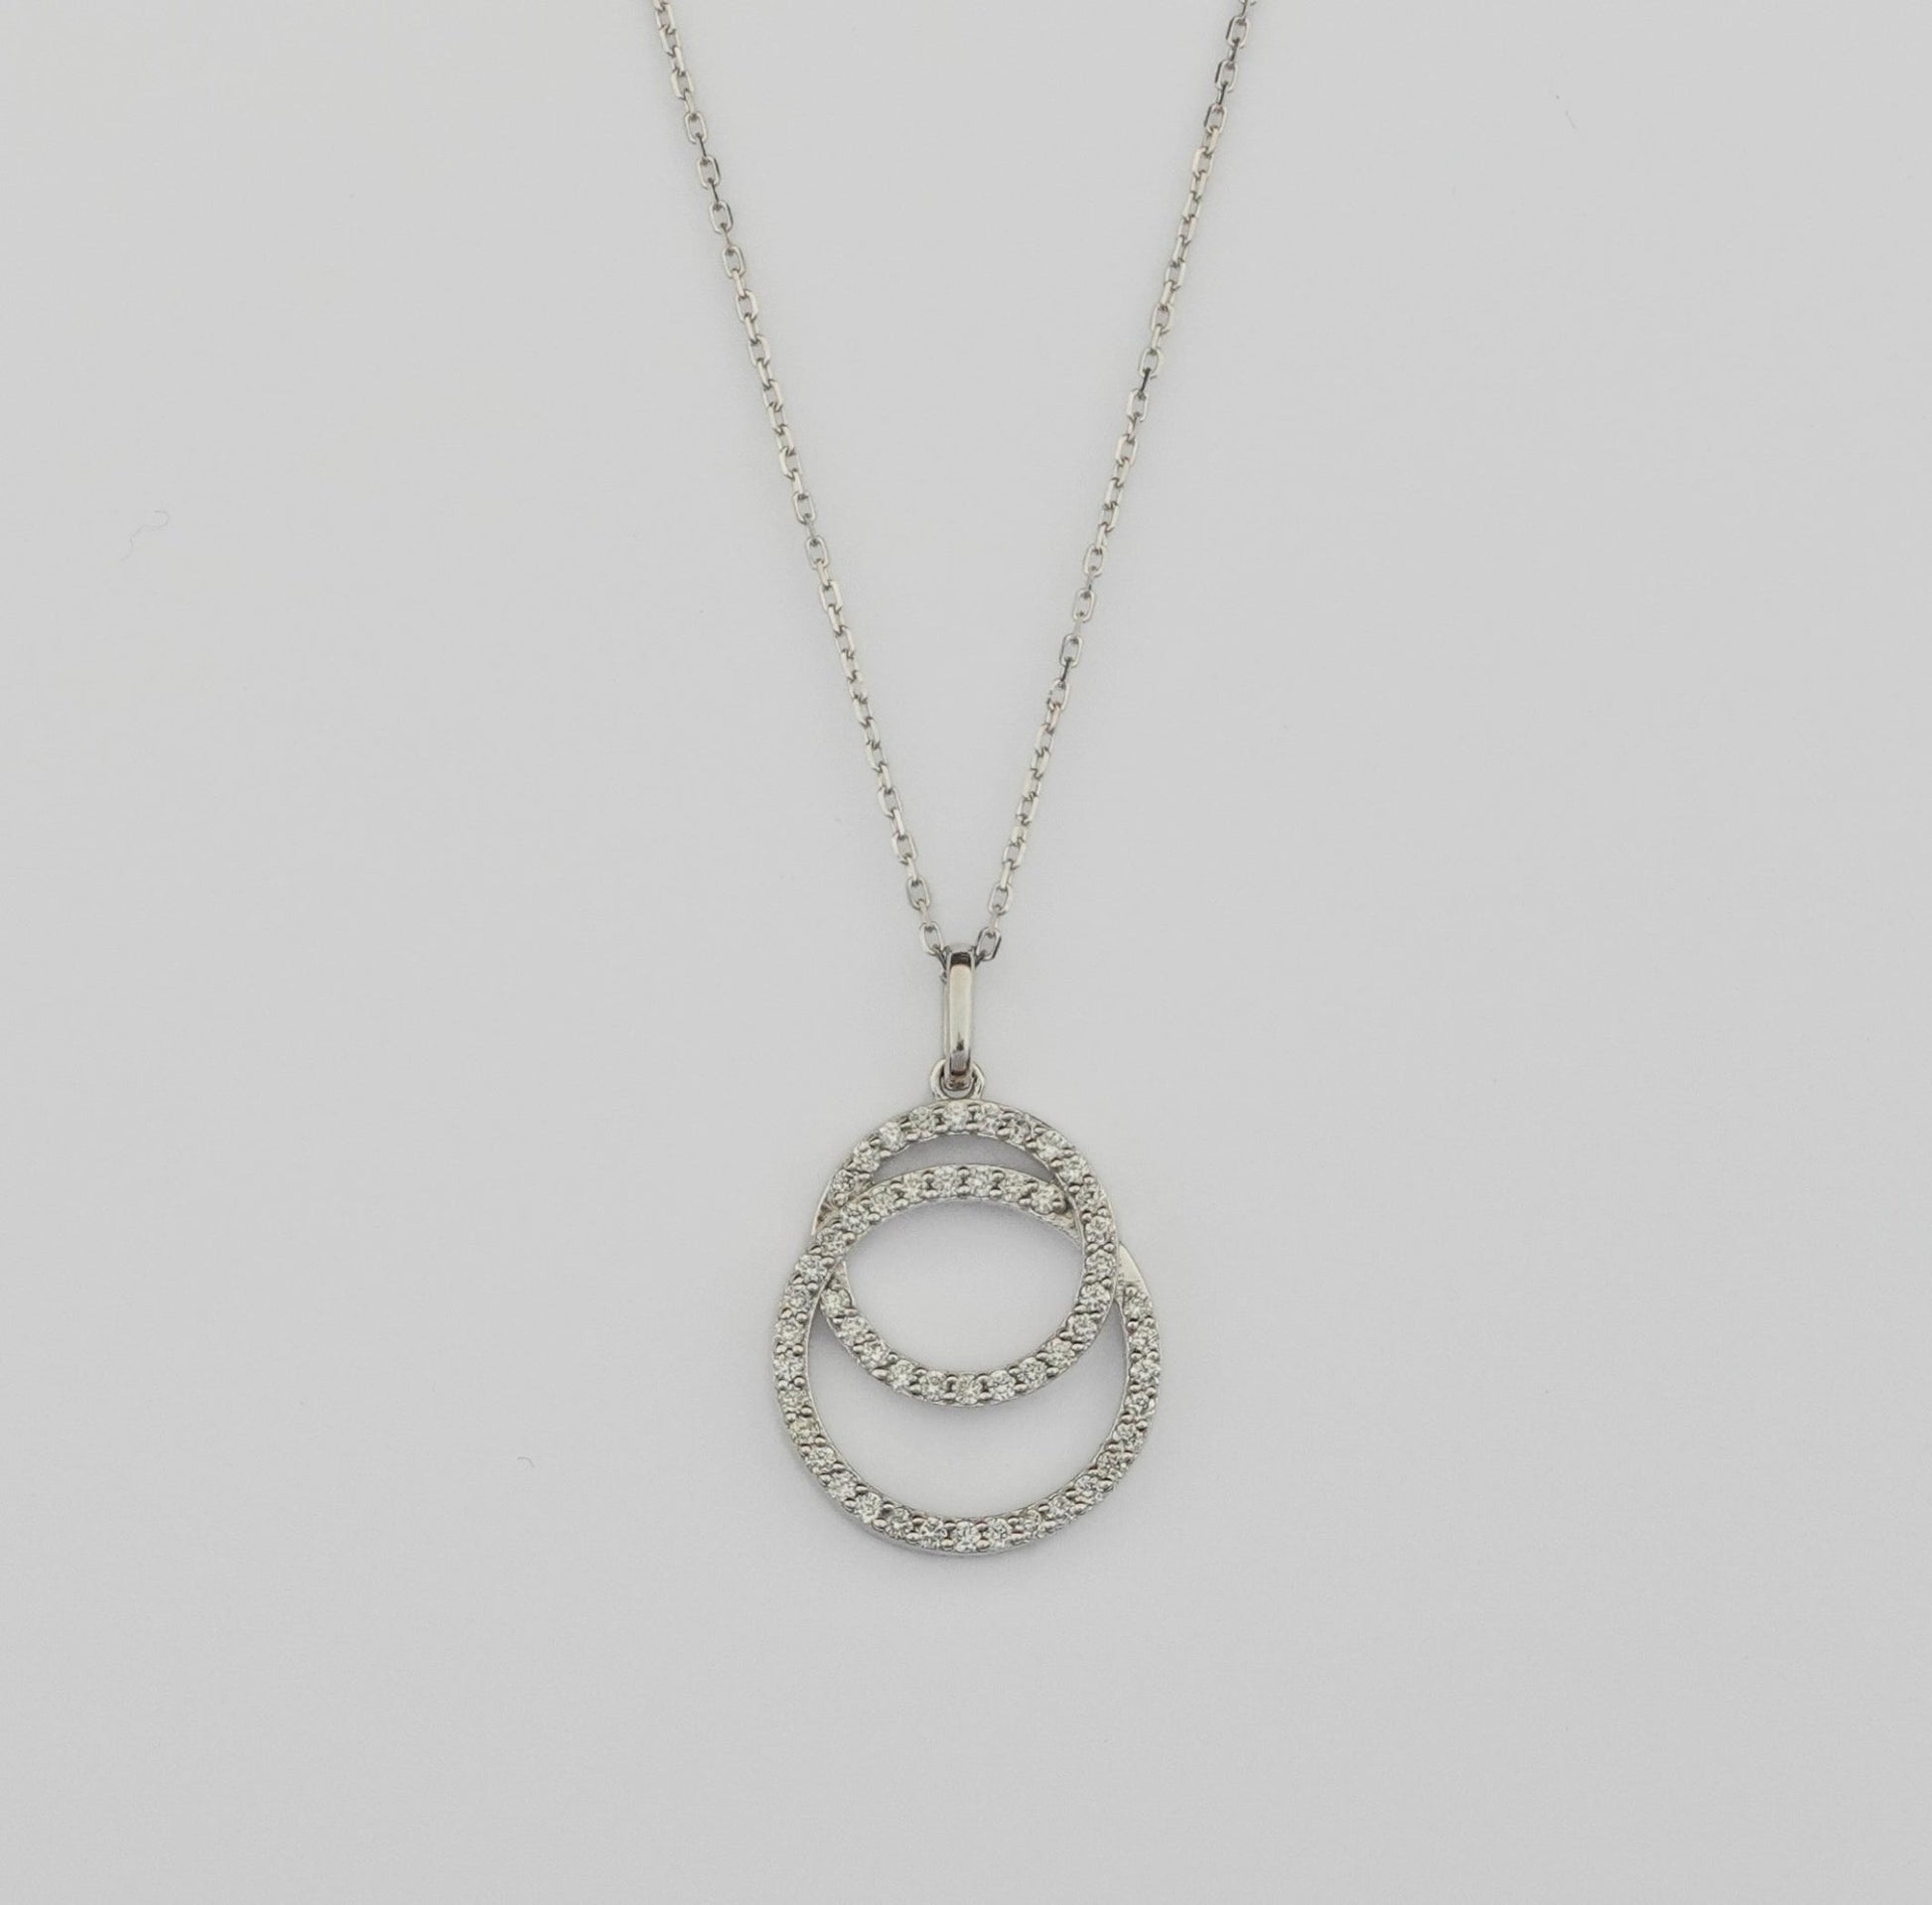 Neo Necklace in Diamond - 18k Gold - Lynor